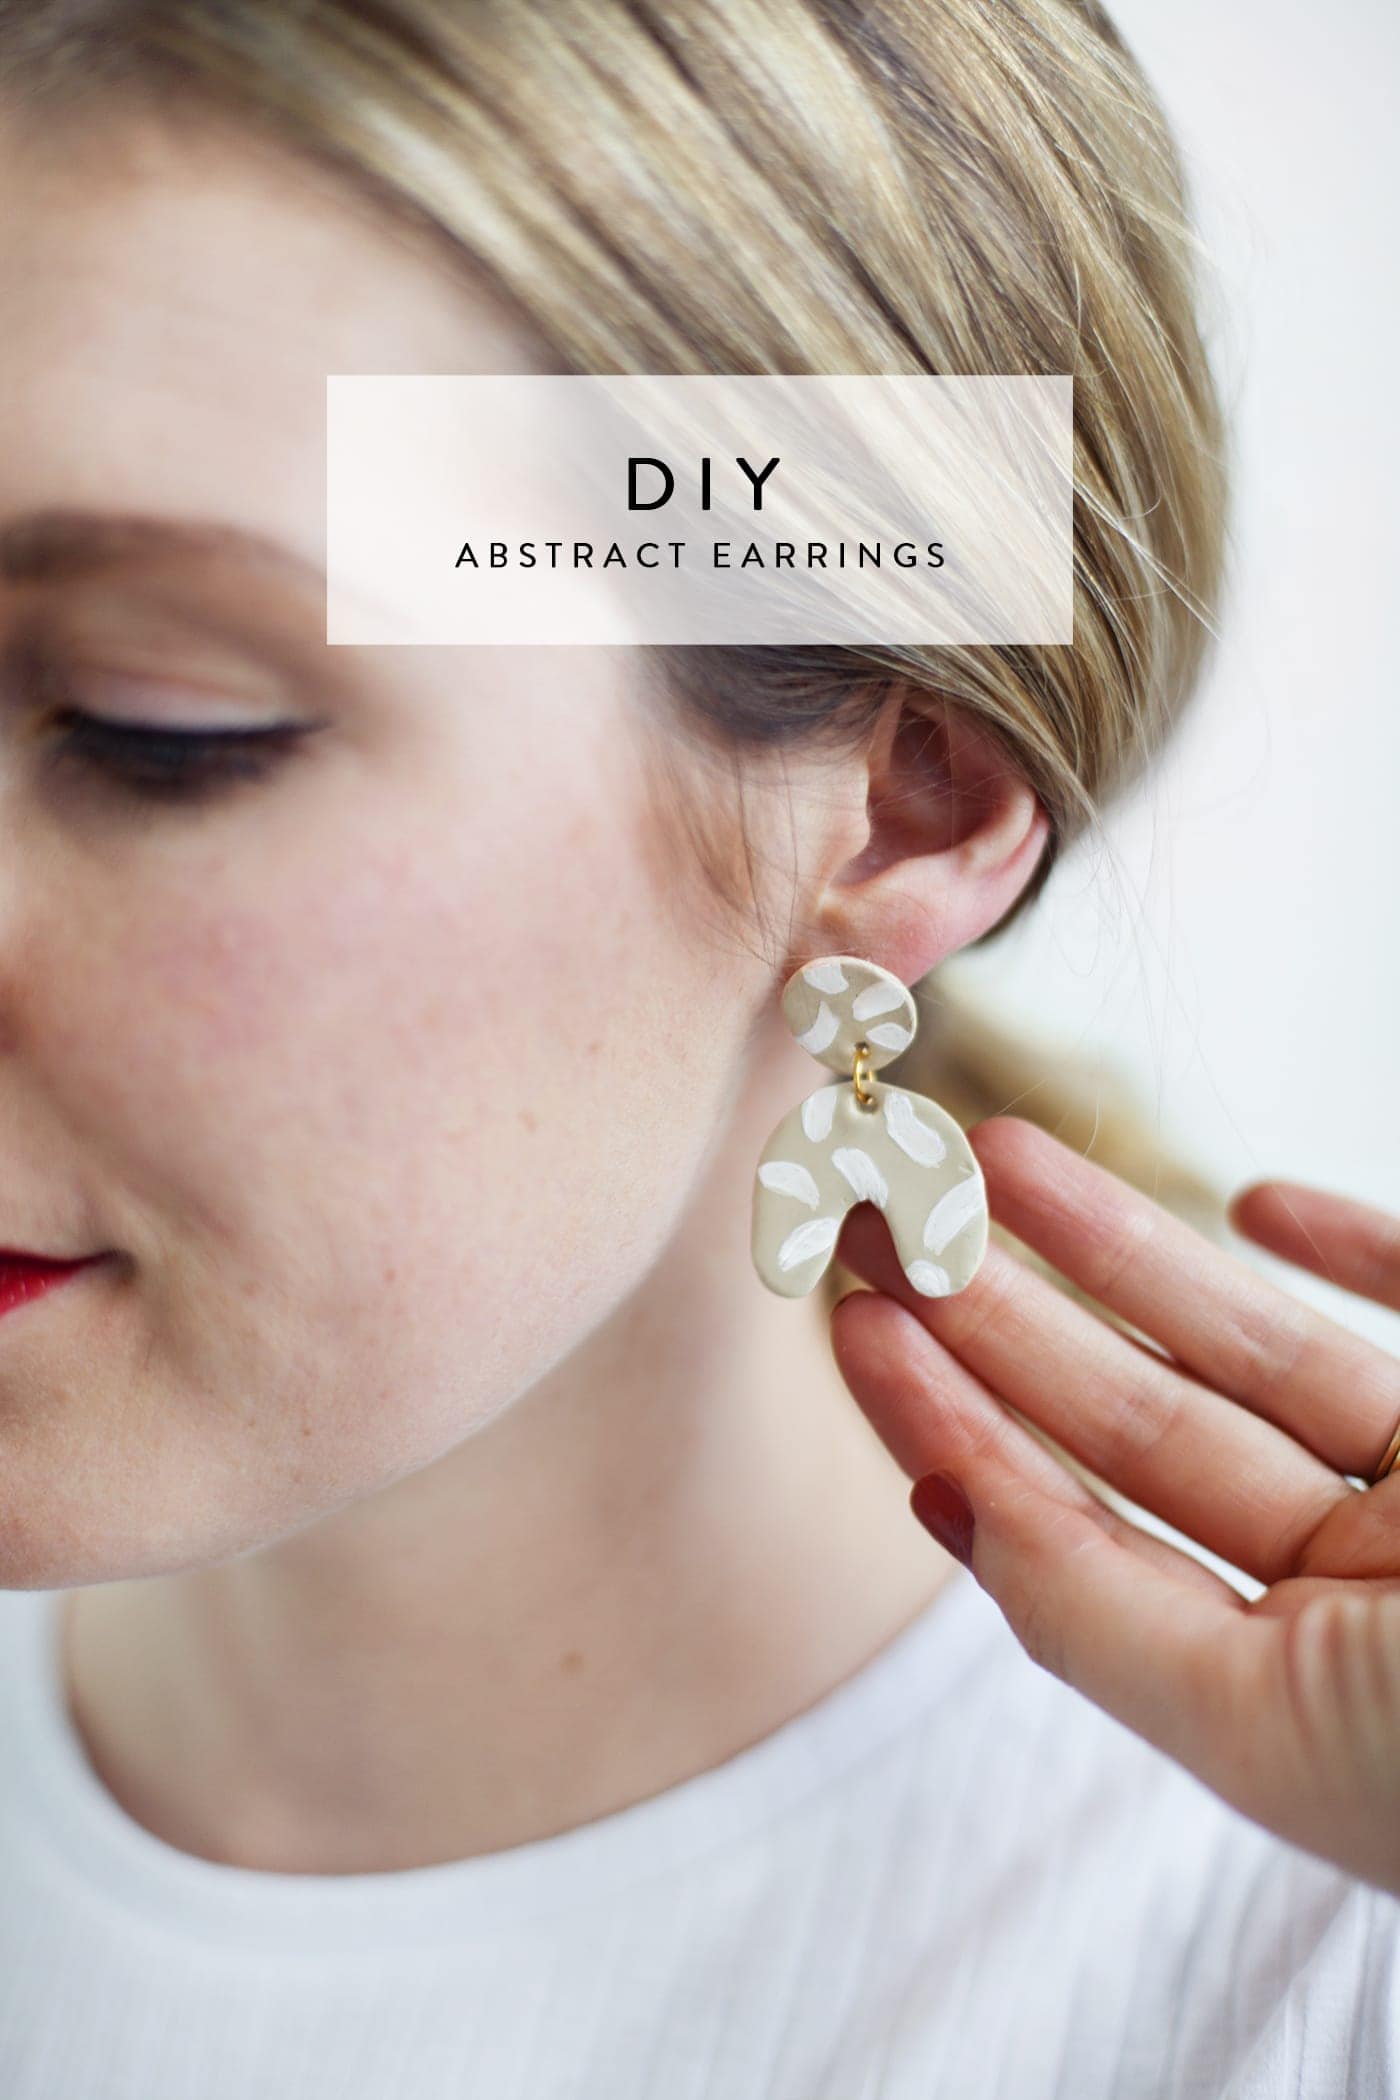 Abstract Shapes: Make Your Own Earrings